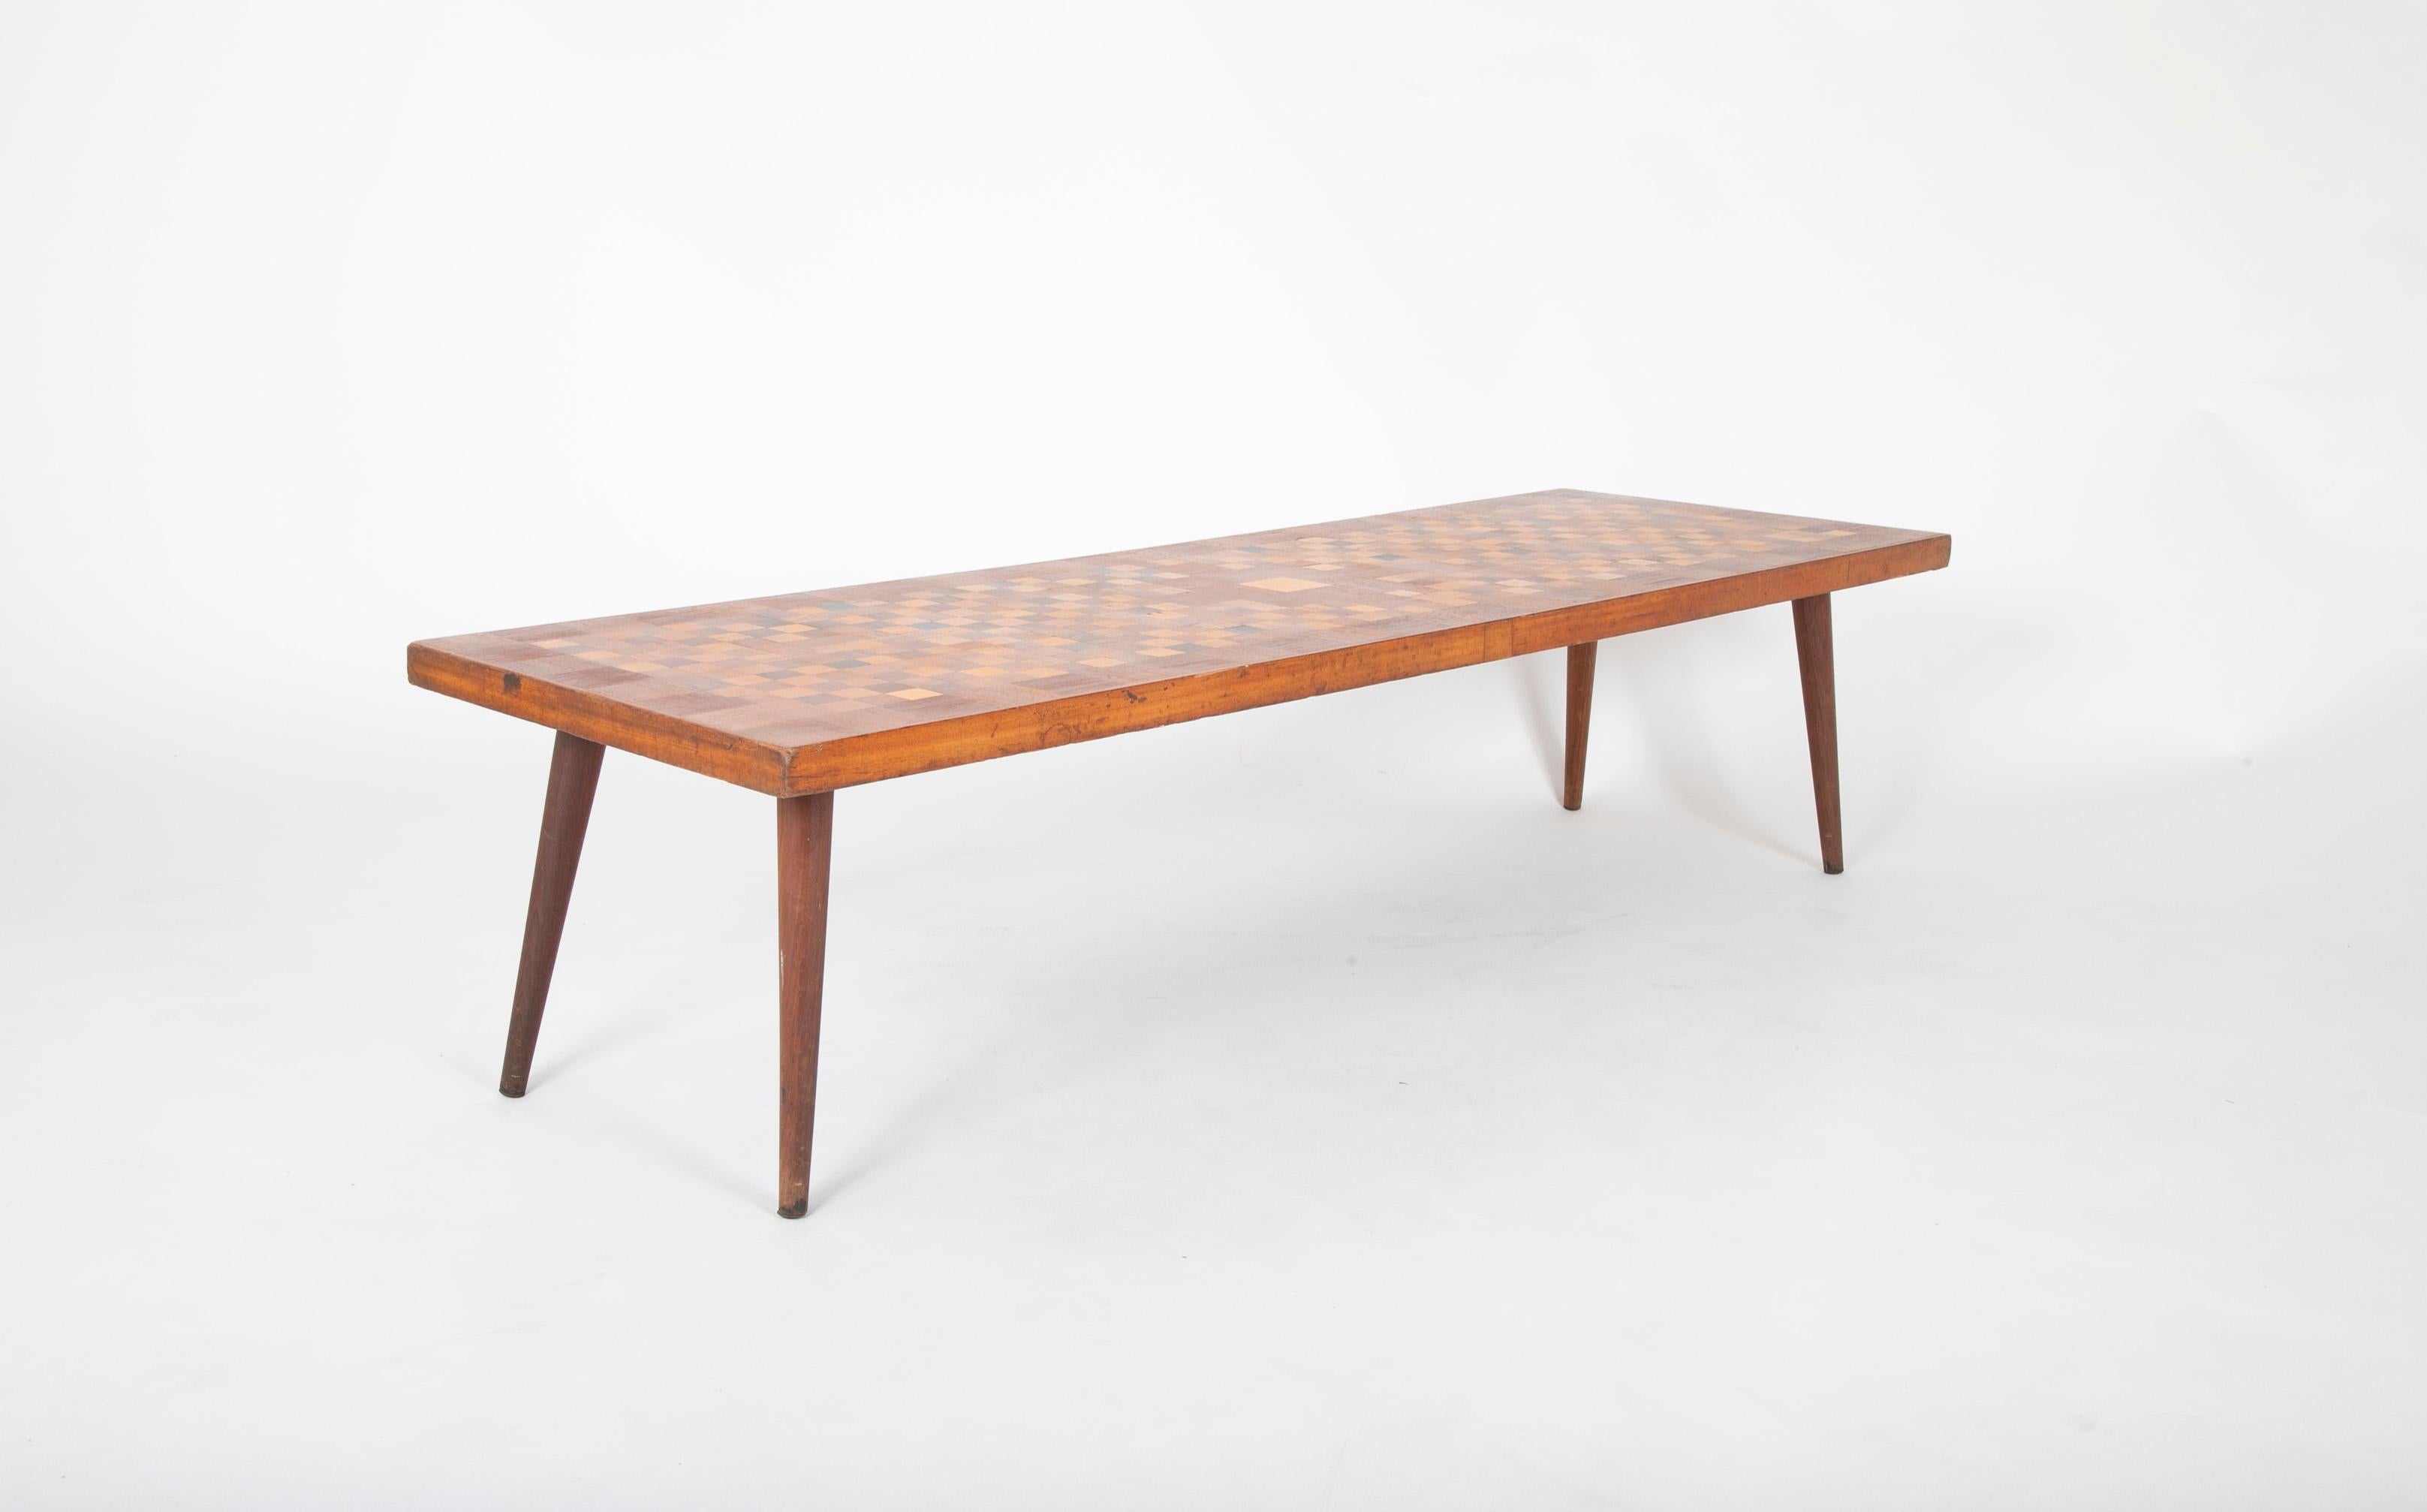 Italian 1960s coffee table with exquisite checkerboard marquetry inlay of various woods. The geometric patterns and spare profile are the height of modernism.